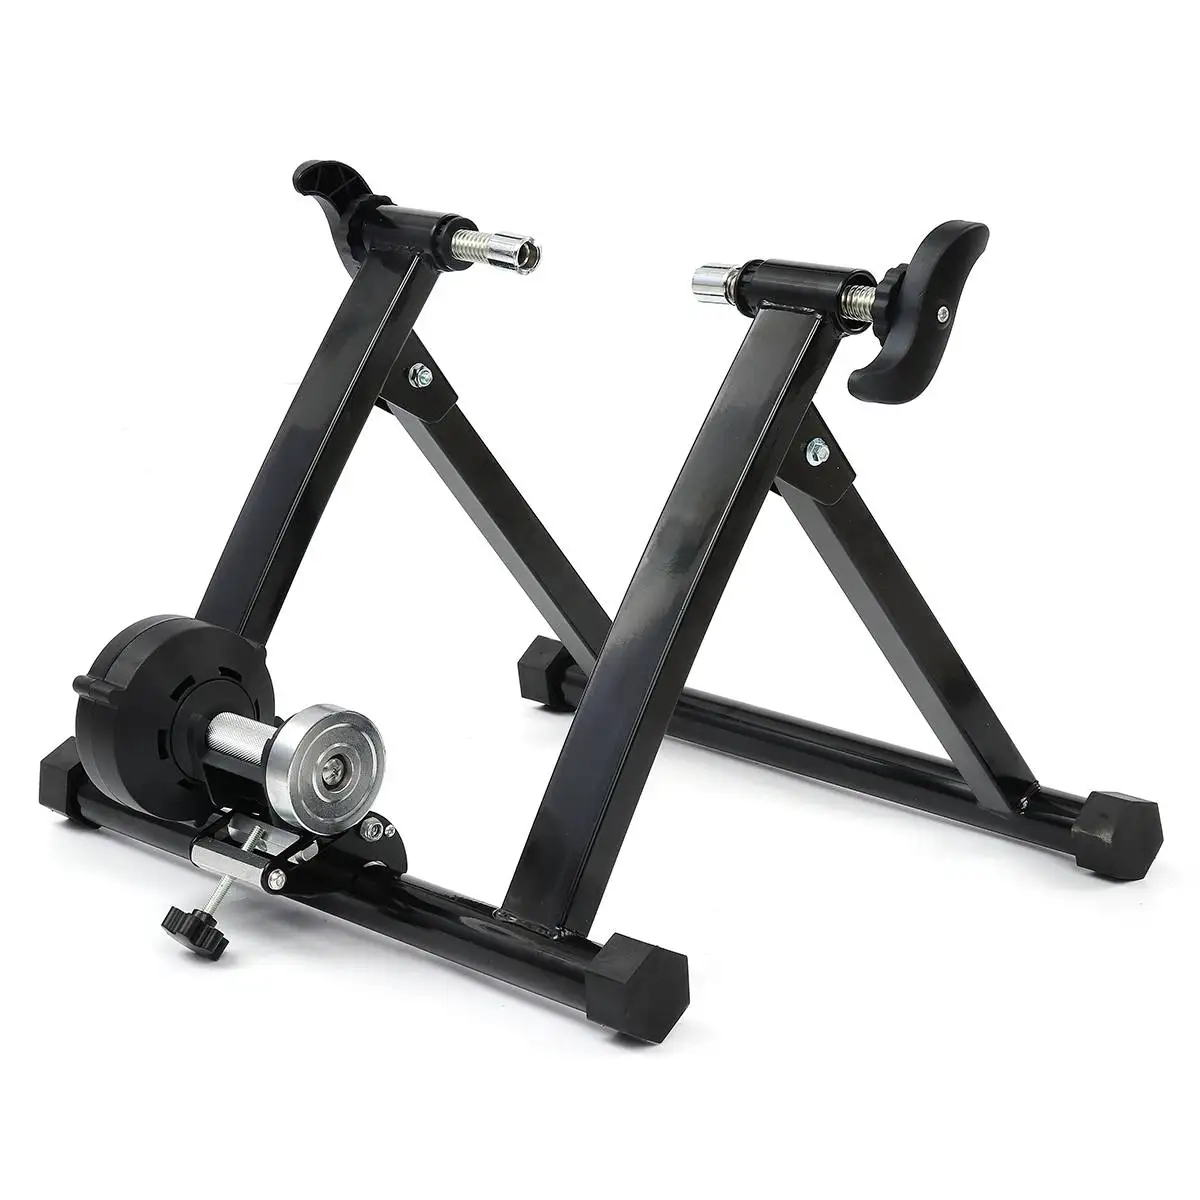 Details about   24-29 Inch Wireless Black Indr Bicycle Bike Trainer Exercise Fitness Stand DHL 